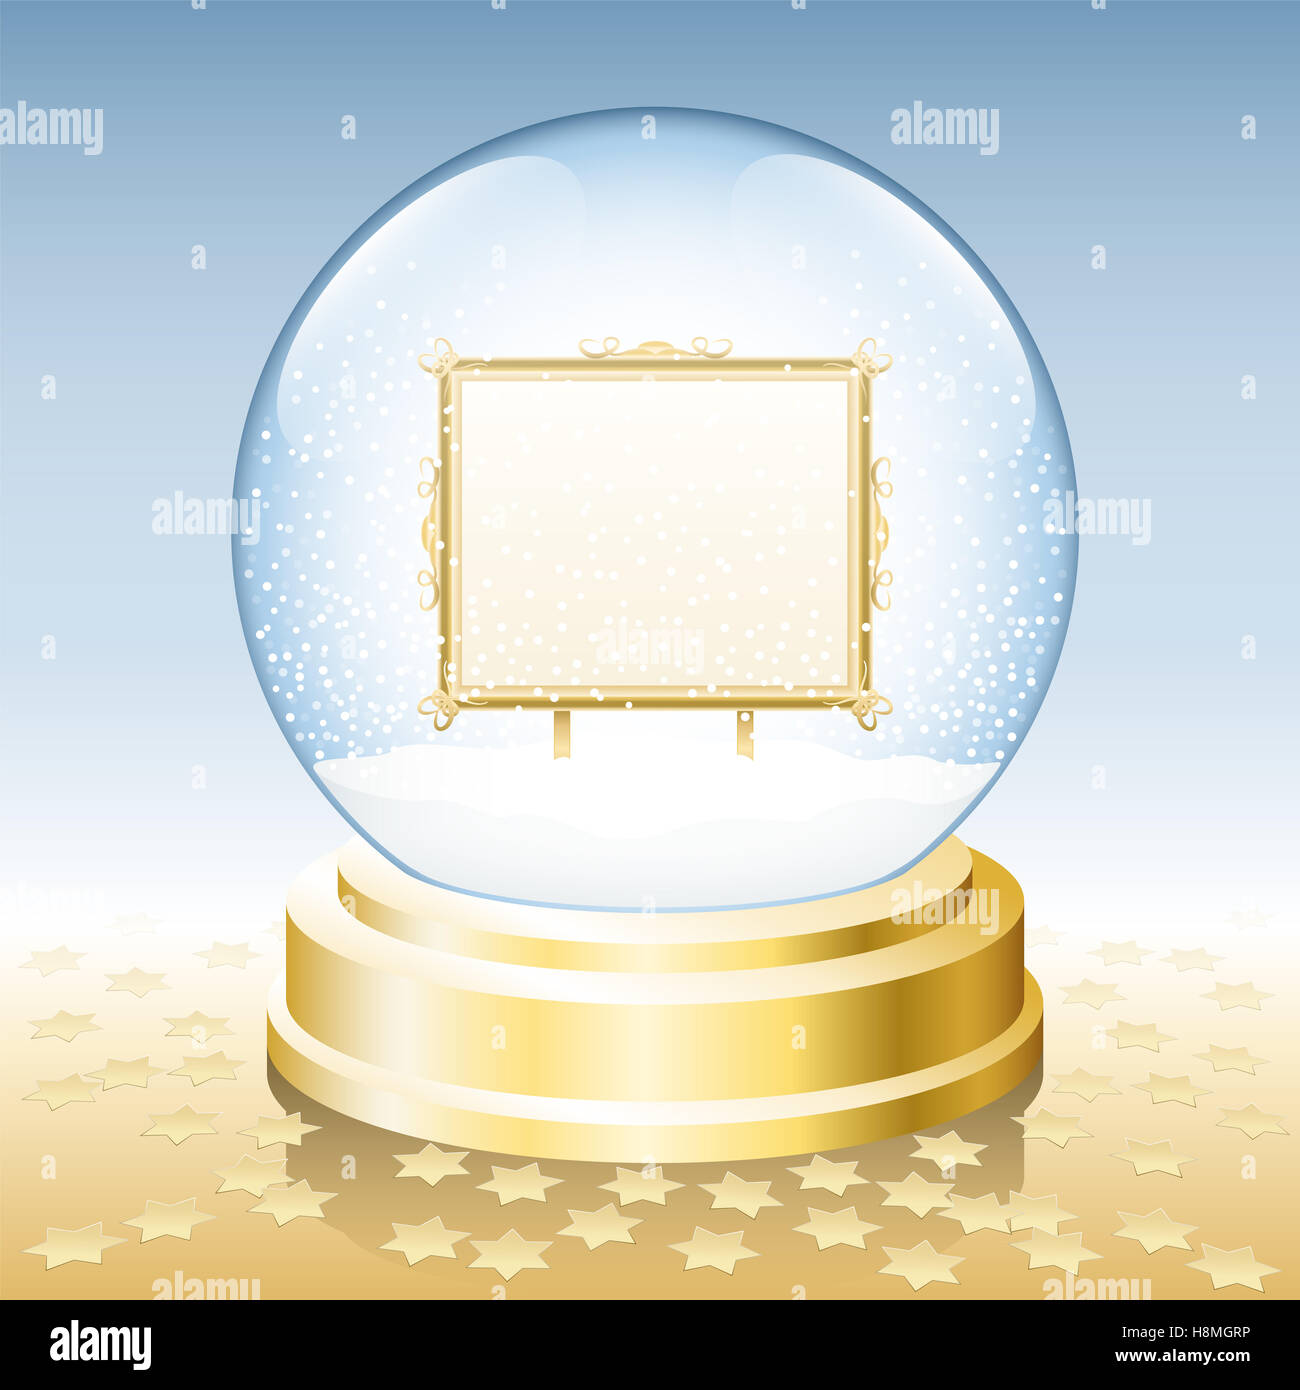 Snow globe with golden frame to insert any photo or text. Stock Photo